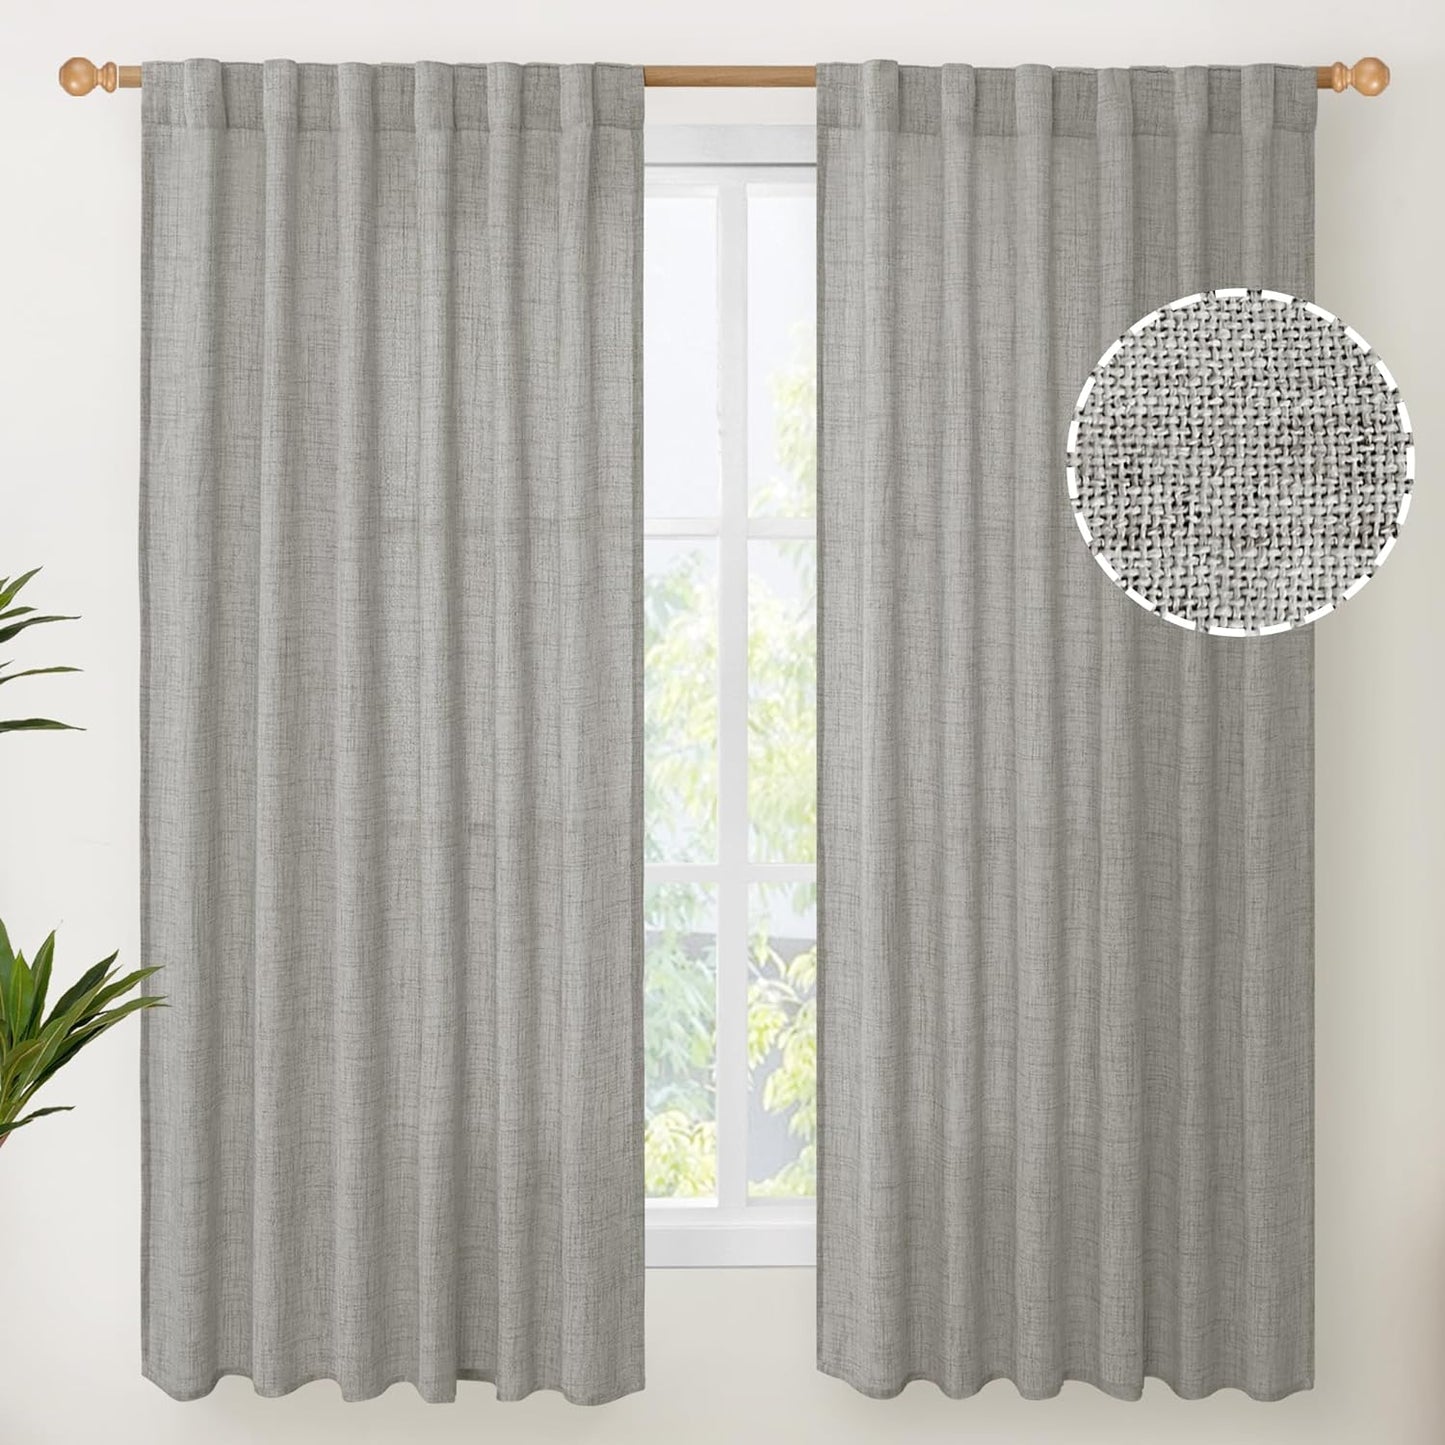 Youngstex Natural Linen Curtains 72 Inch Length 2 Panels for Living Room Light Filtering Textured Window Drapes for Bedroom Dining Office Back Tab Rod Pocket, 52 X 72 Inch  YoungsTex Dark Grey 52W X 63L 